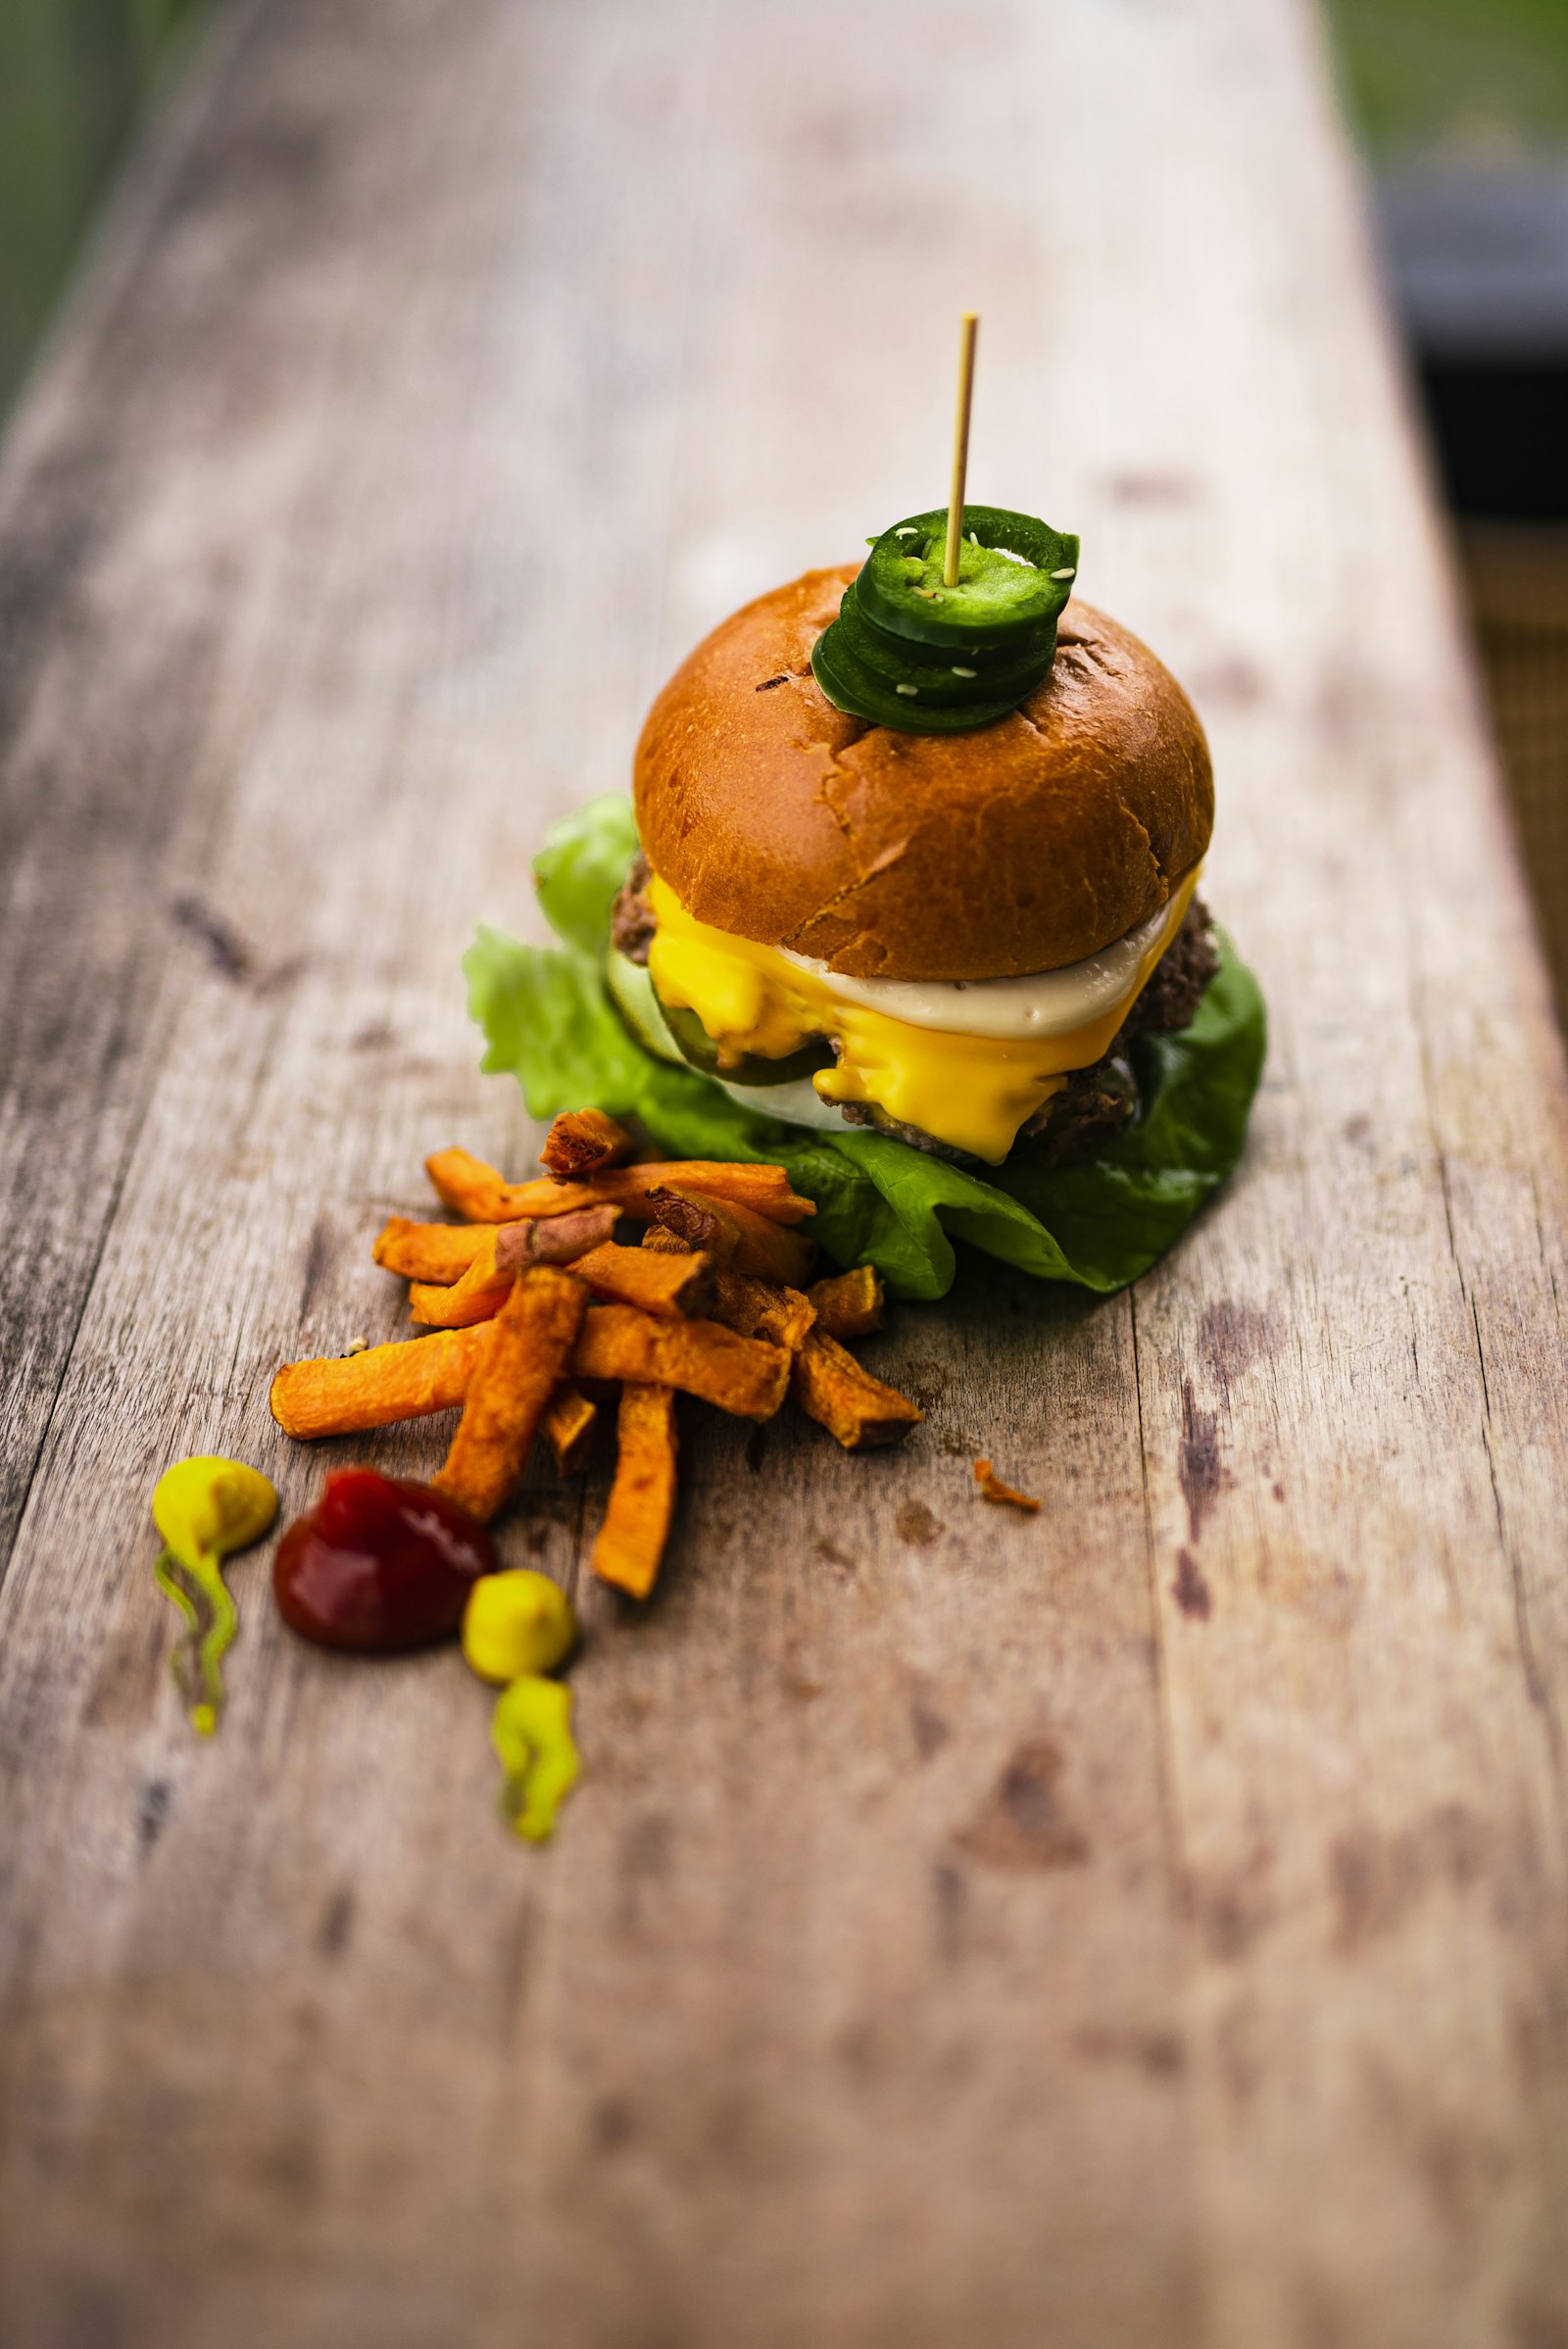 Nikon D750 + Sigma 50mm F1.4 DG HSM Art sample photo. Burger with lettuce and photography